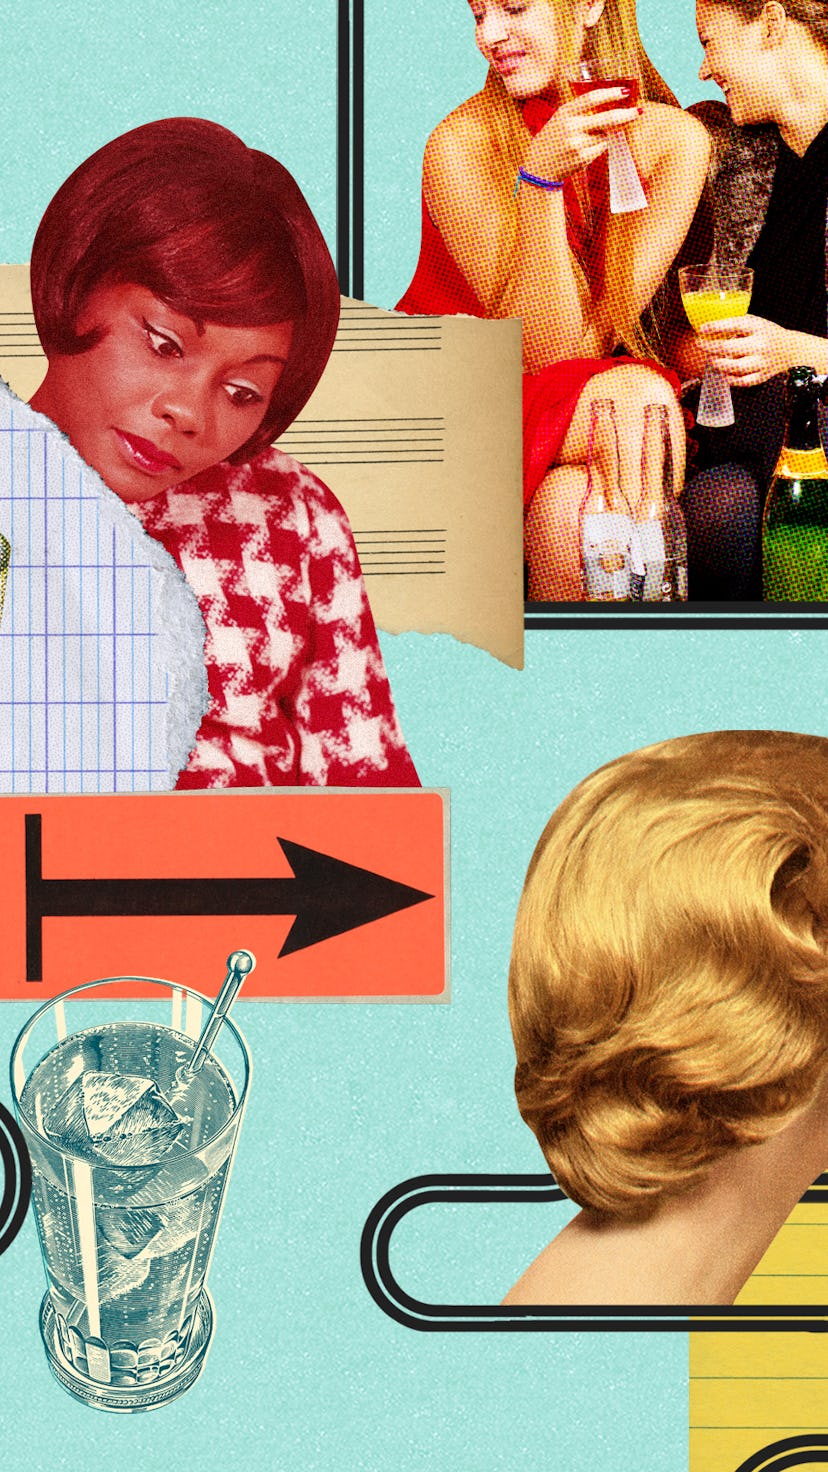 Three women describe how their friendships changed once they quit drinking.